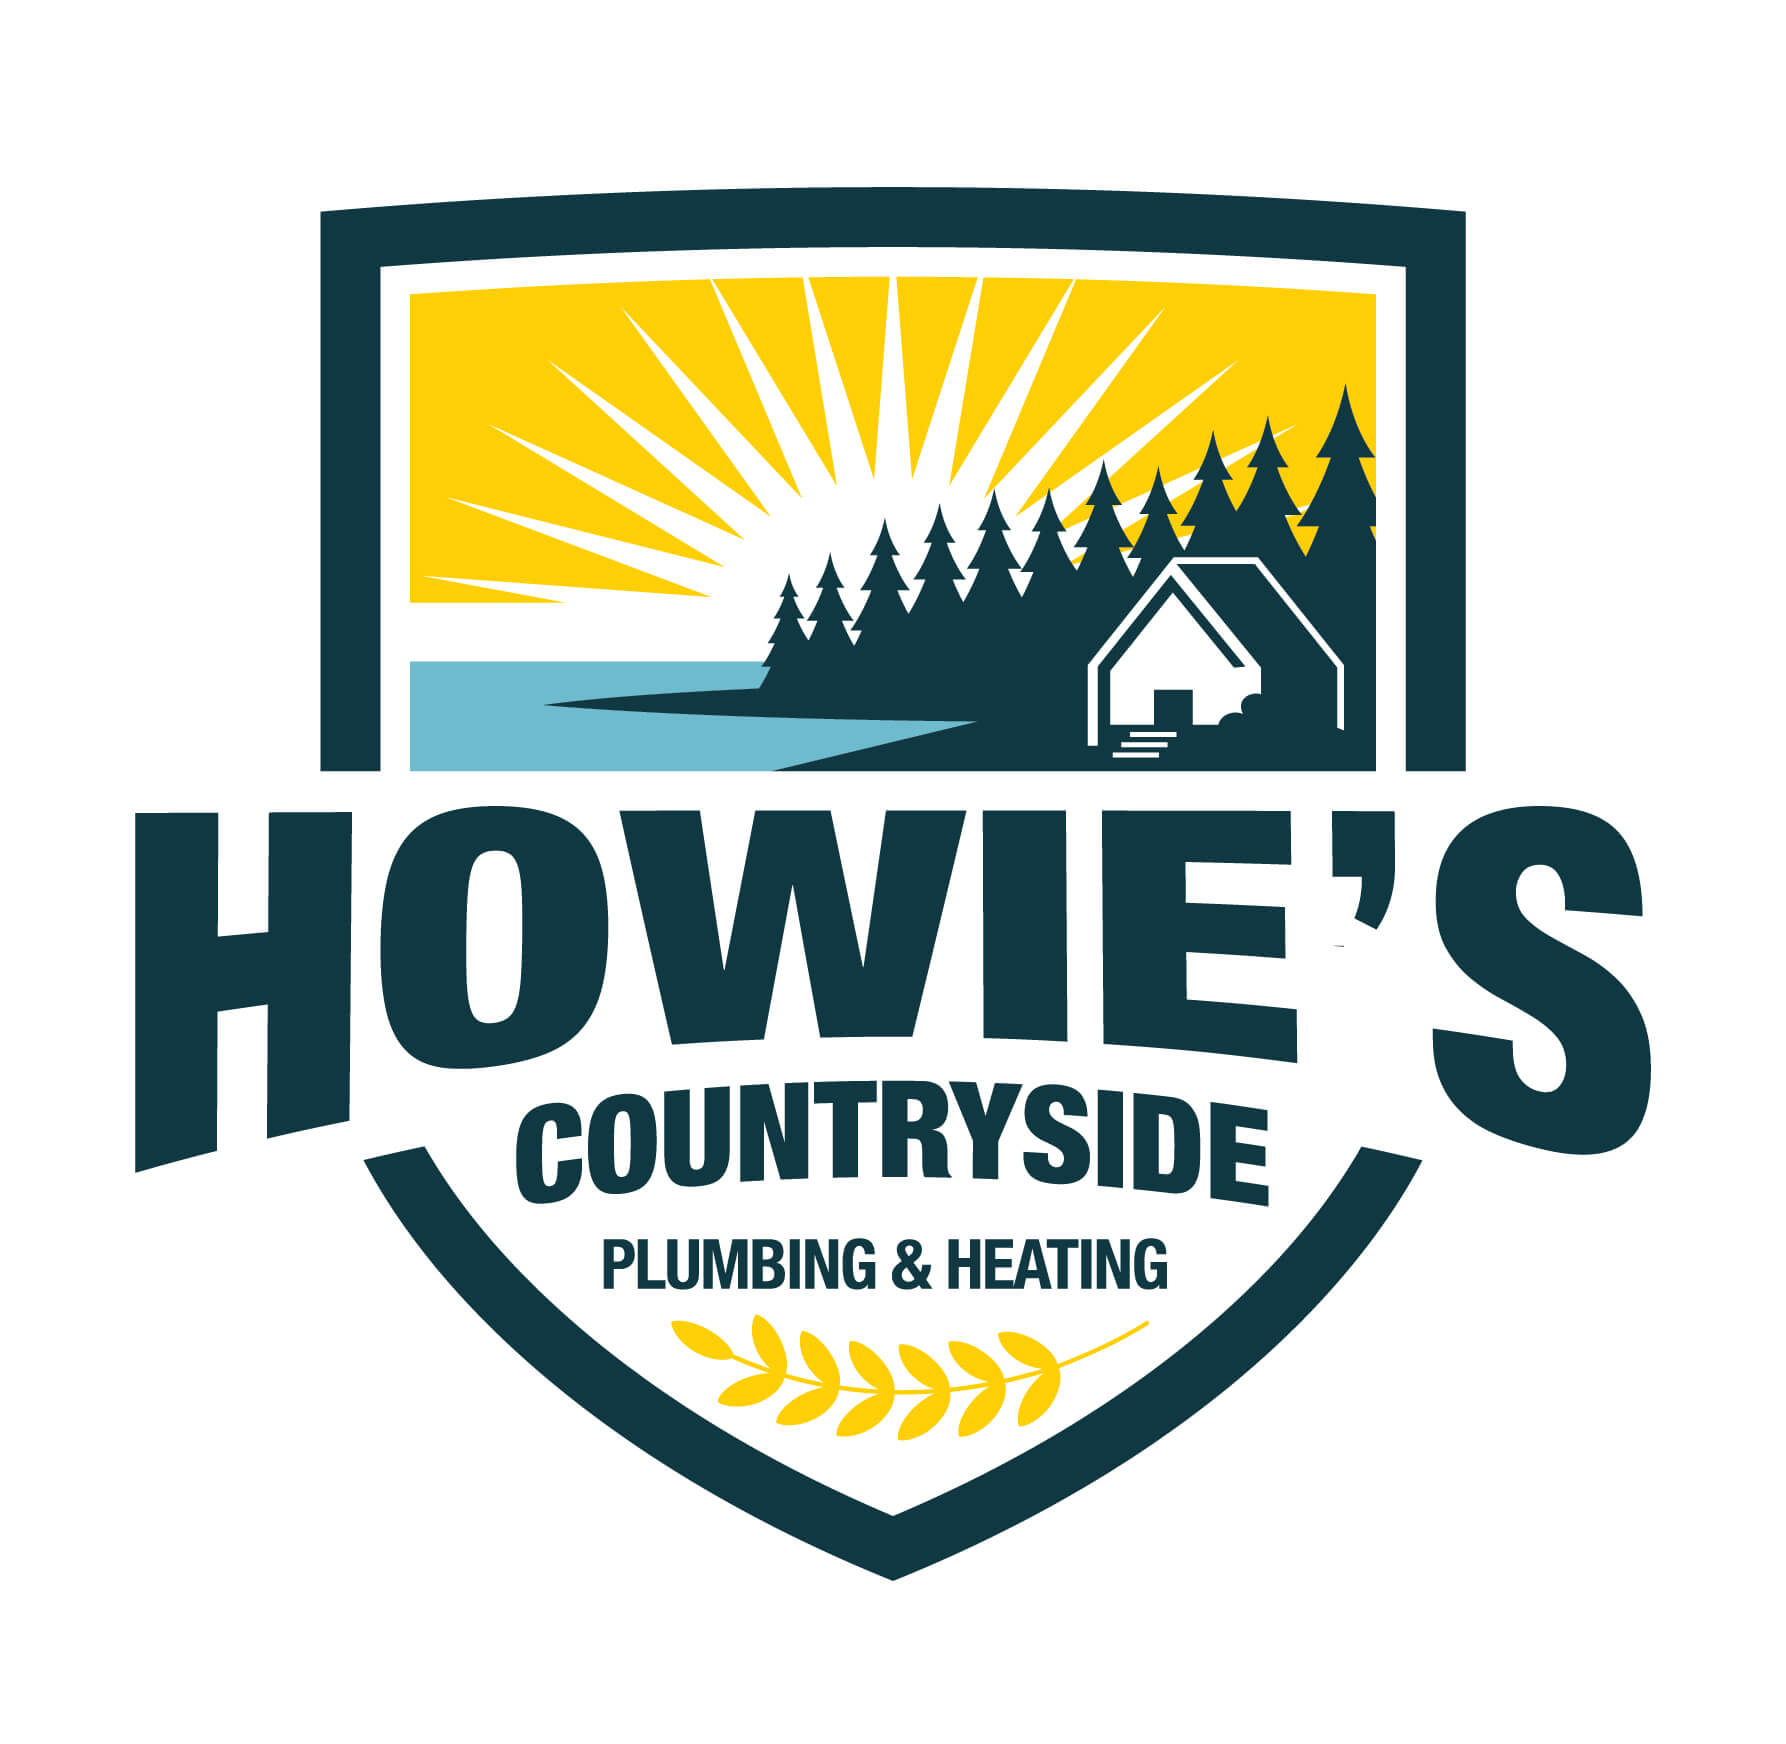 Howie's Countryside Plumbing and Heating logo